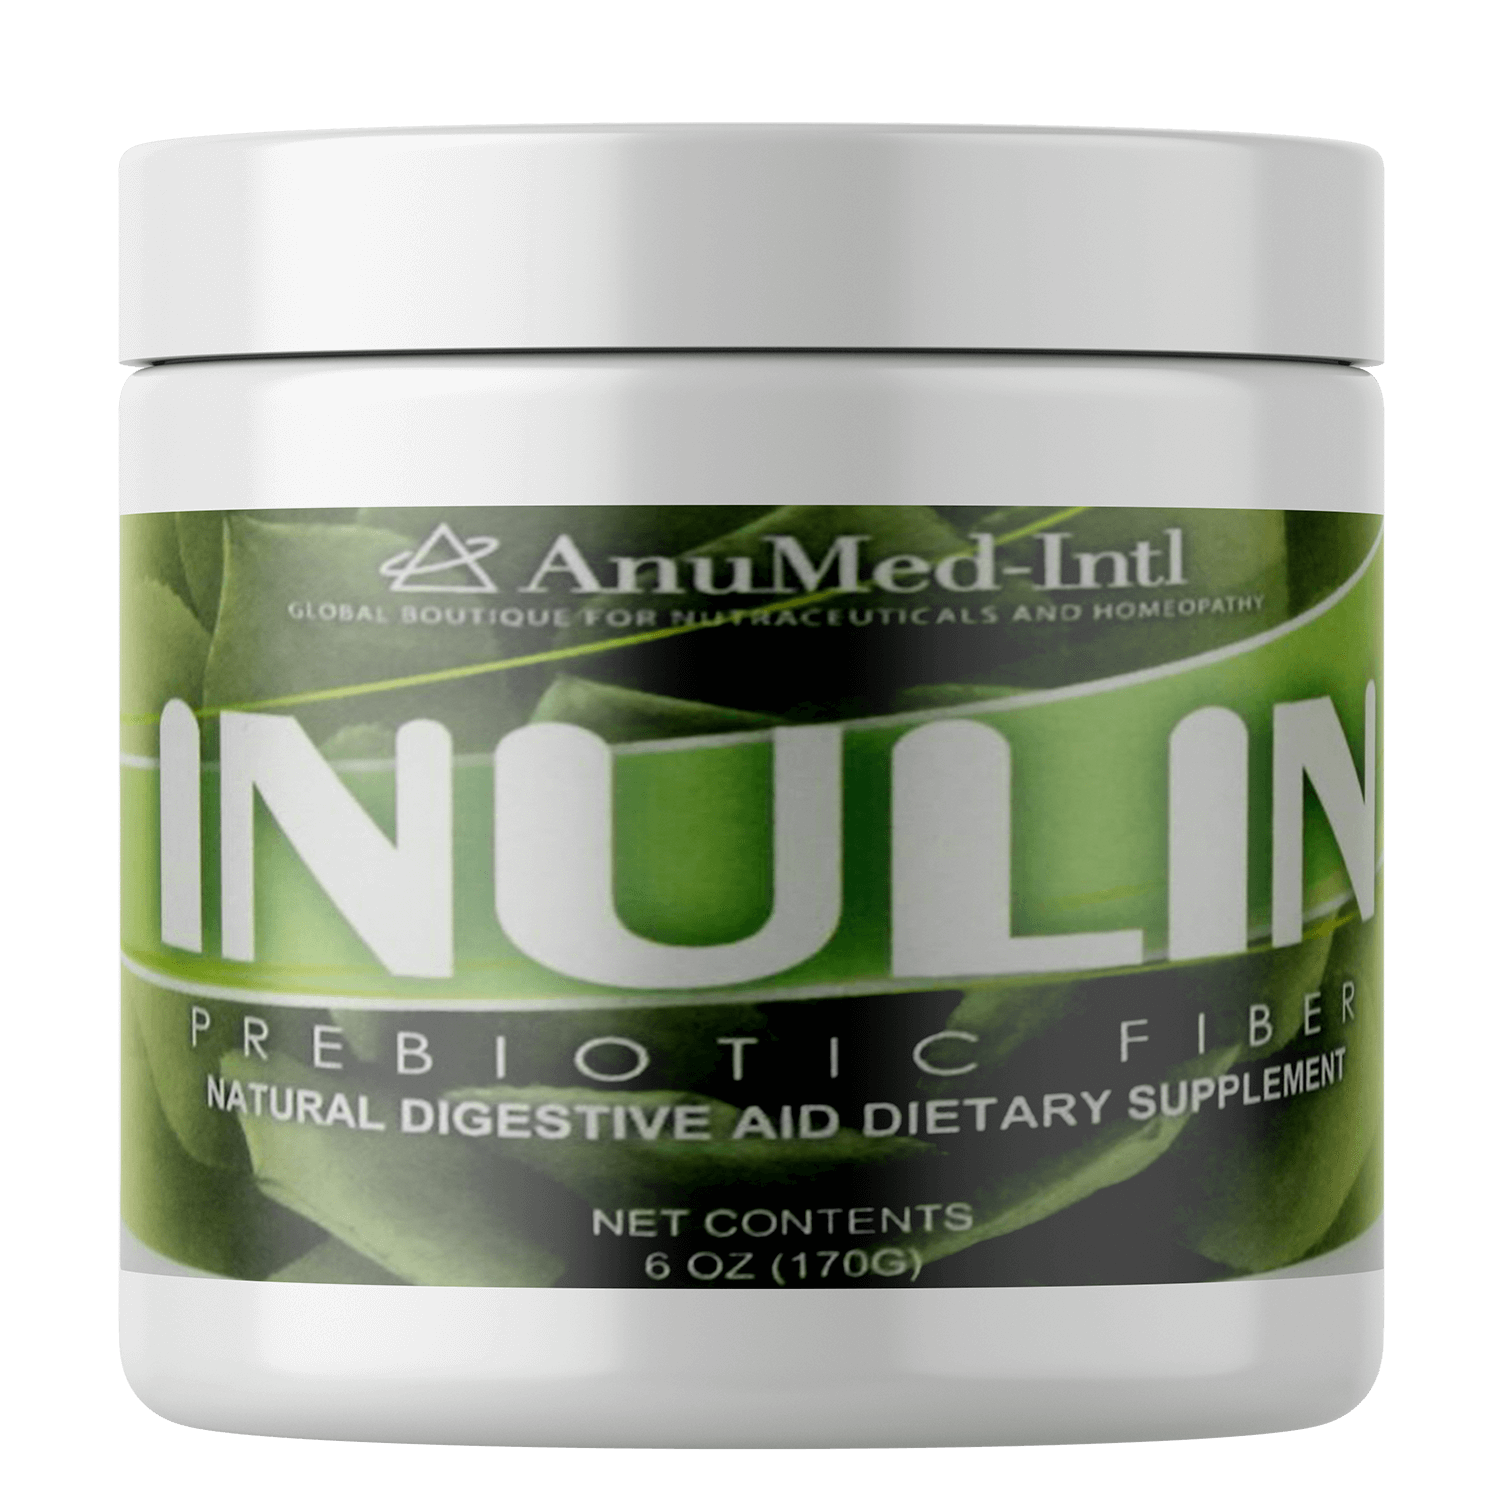 AnuMed Inulin ( 6 oz ) a polysaccharide, is a Soluble Fiber is indigestible by The Body and Beneficial to Good Bacteria The Gut.